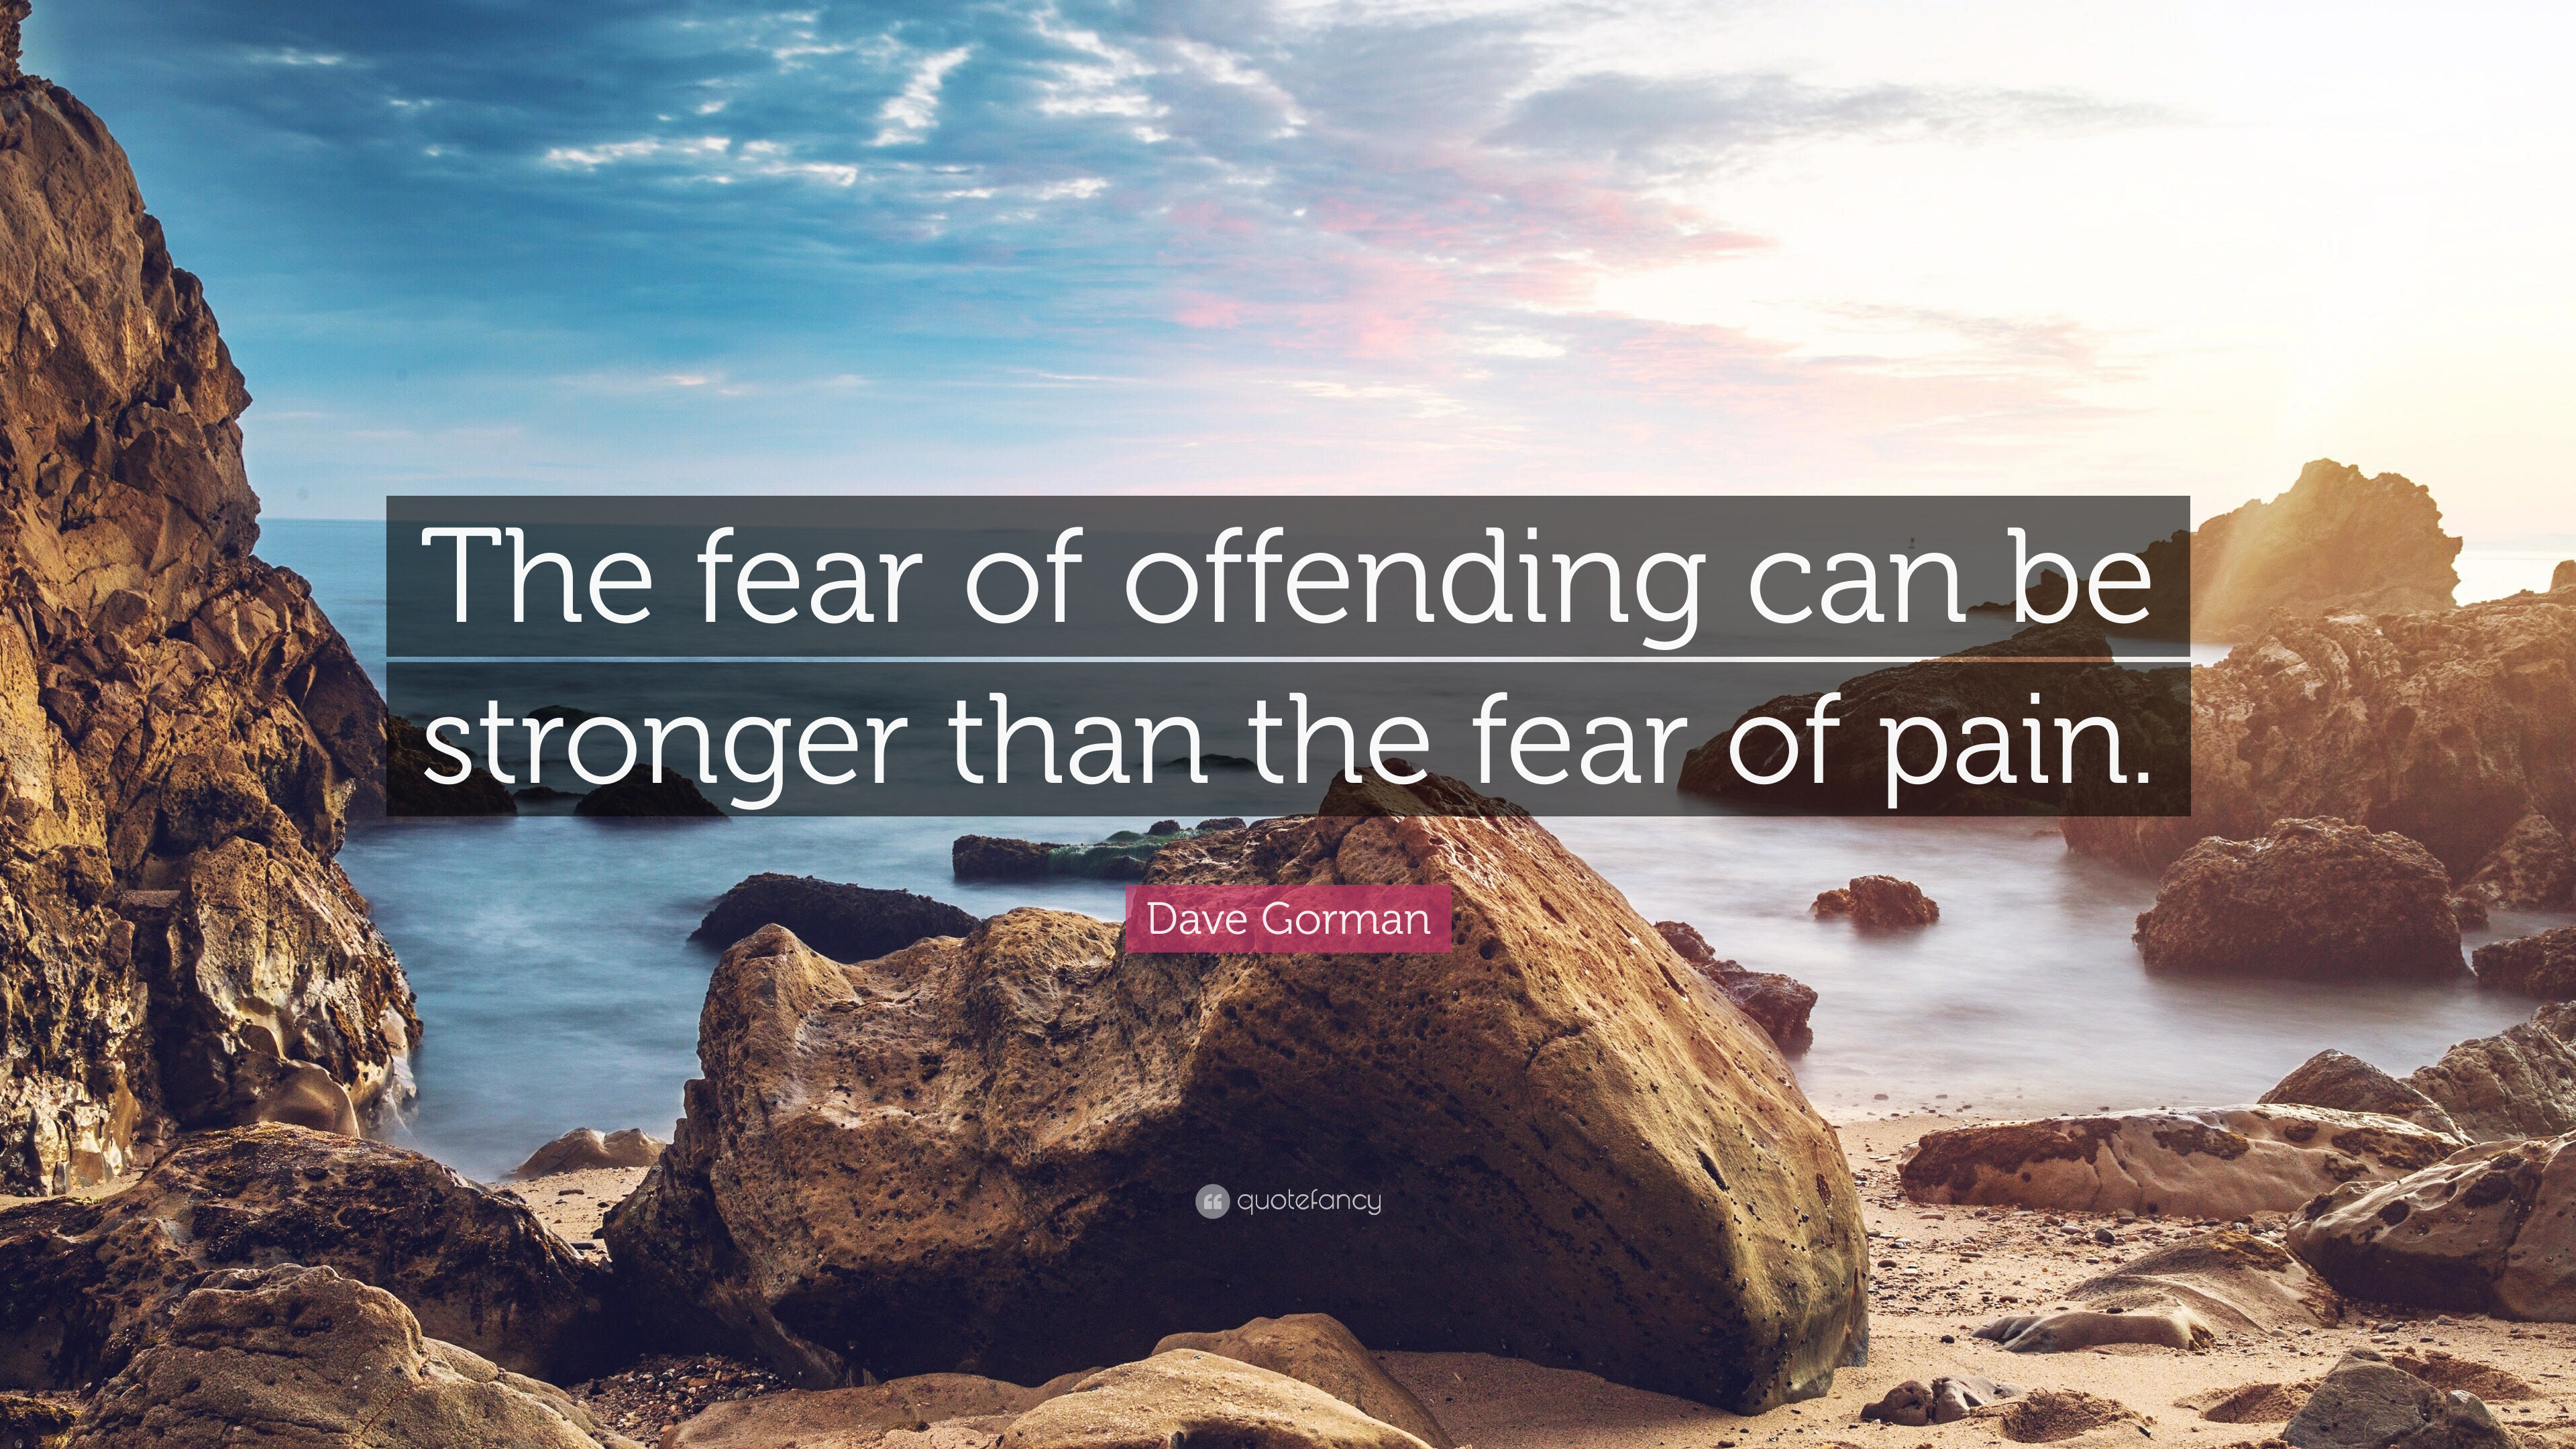 3840x2160 Dave Gorman Quote: “The fear of offending can be stronger than the fear of